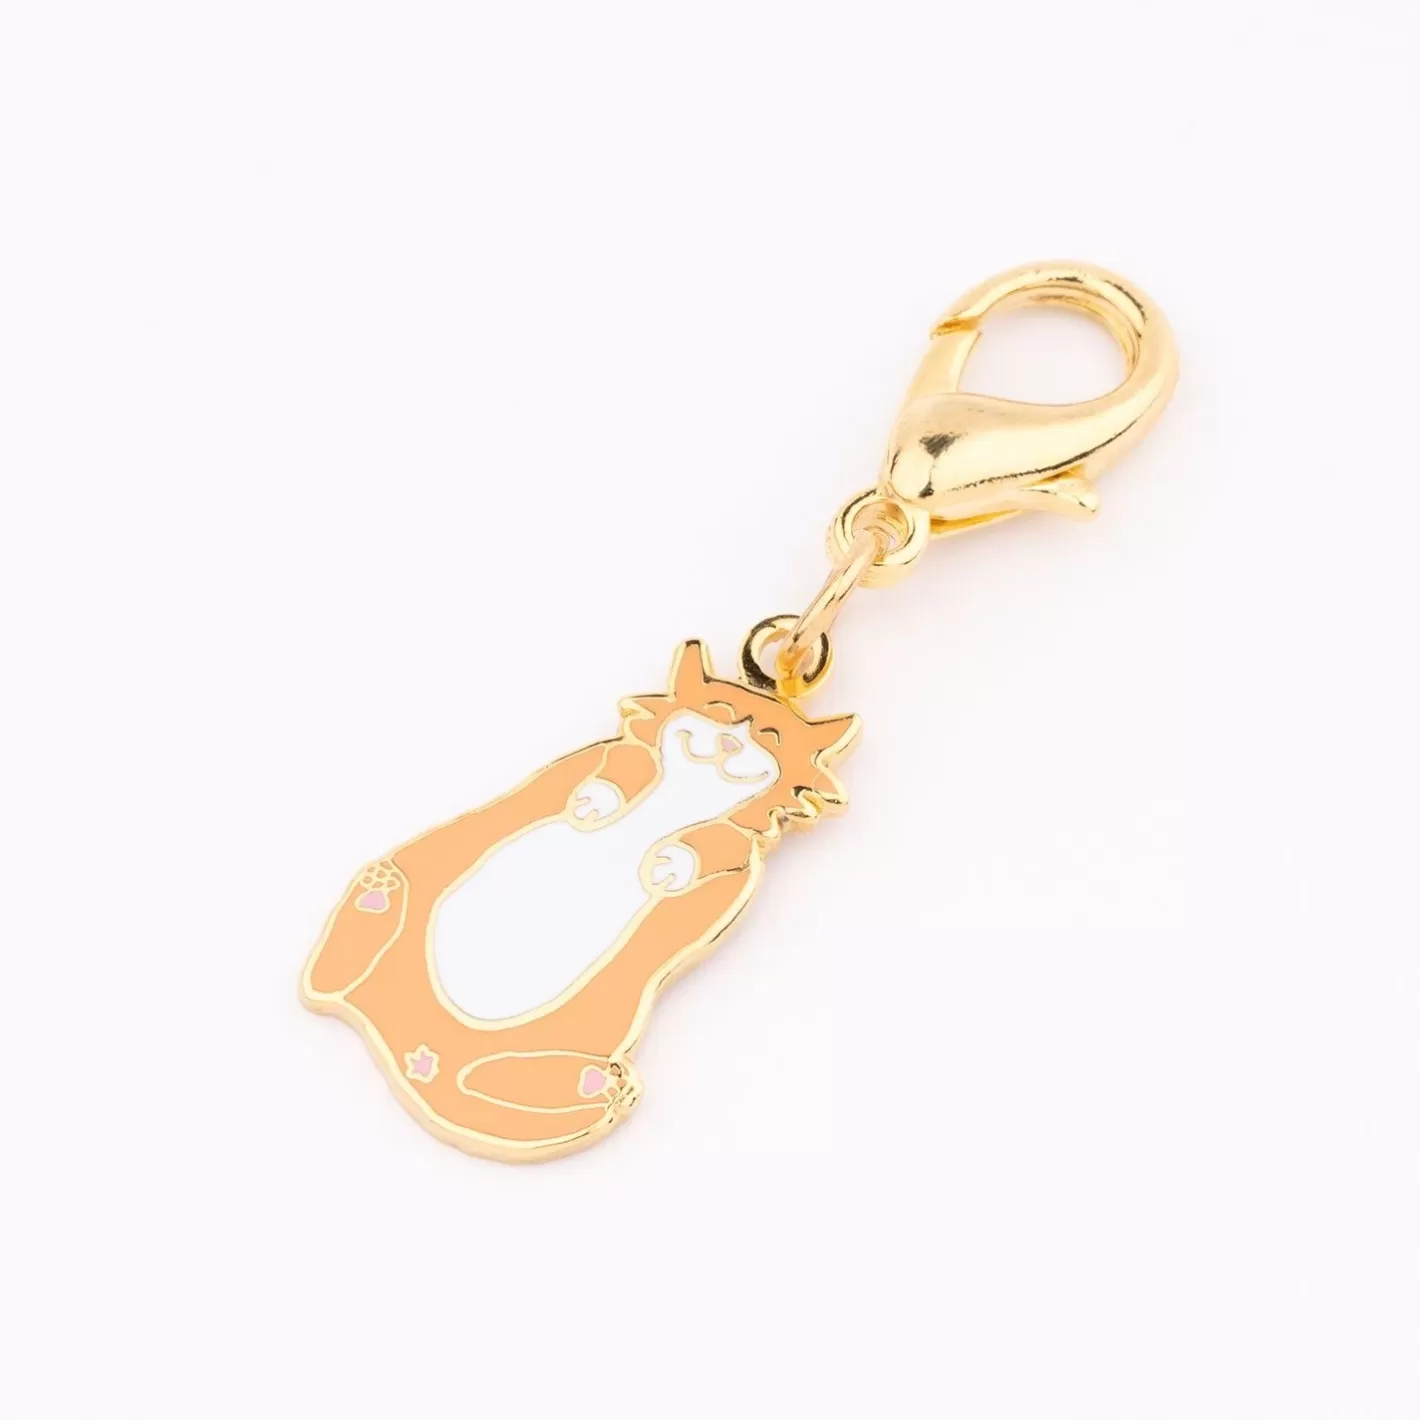 Ginger Cat Key Ring / Pet Tag>Coucou Suzette Discount